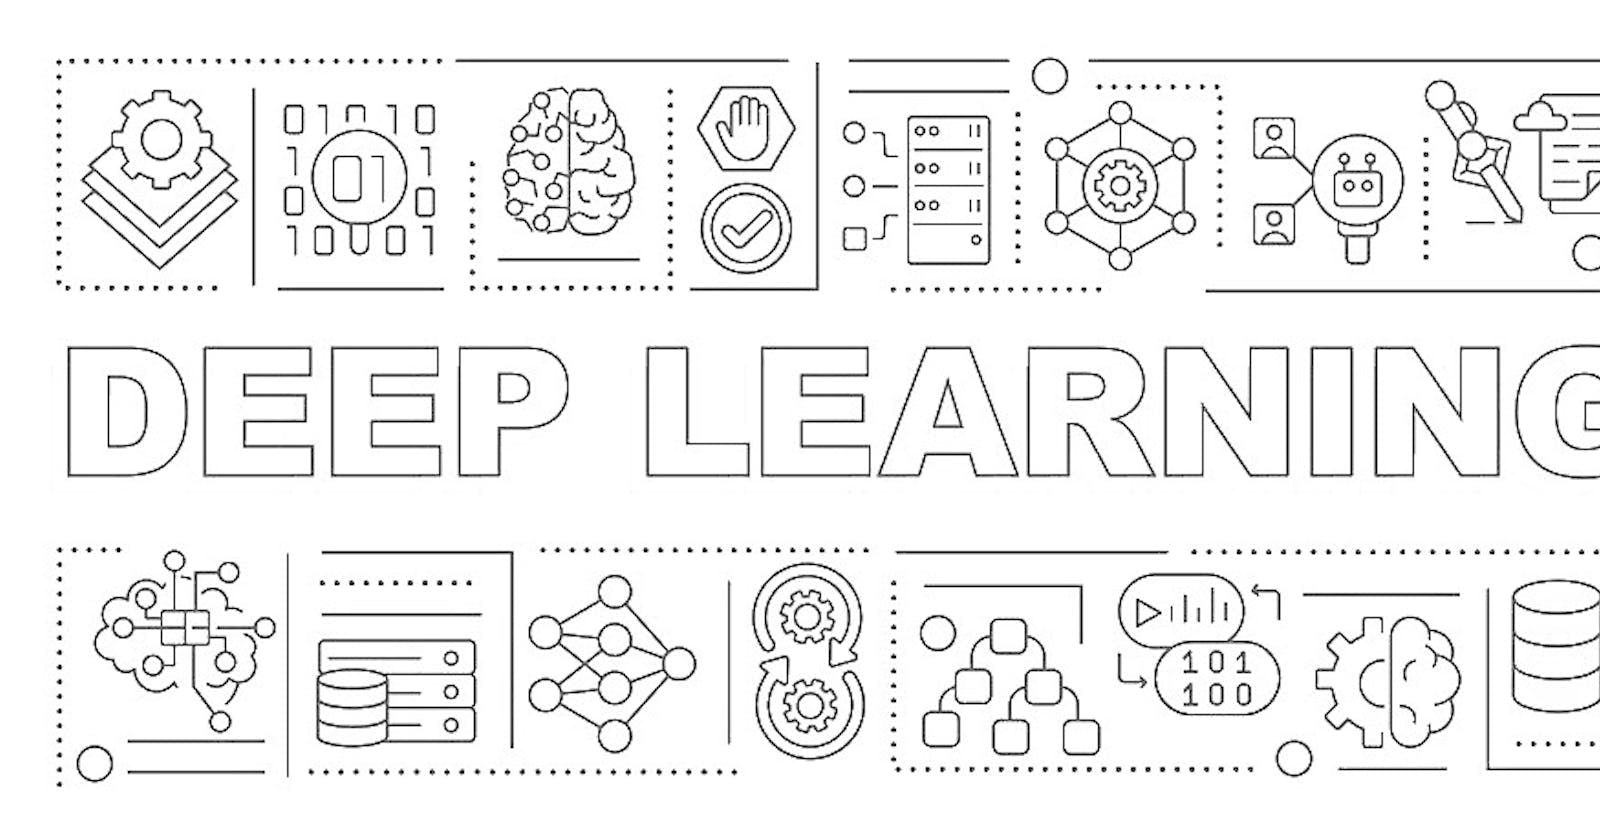 An Introduction to Deep Learning